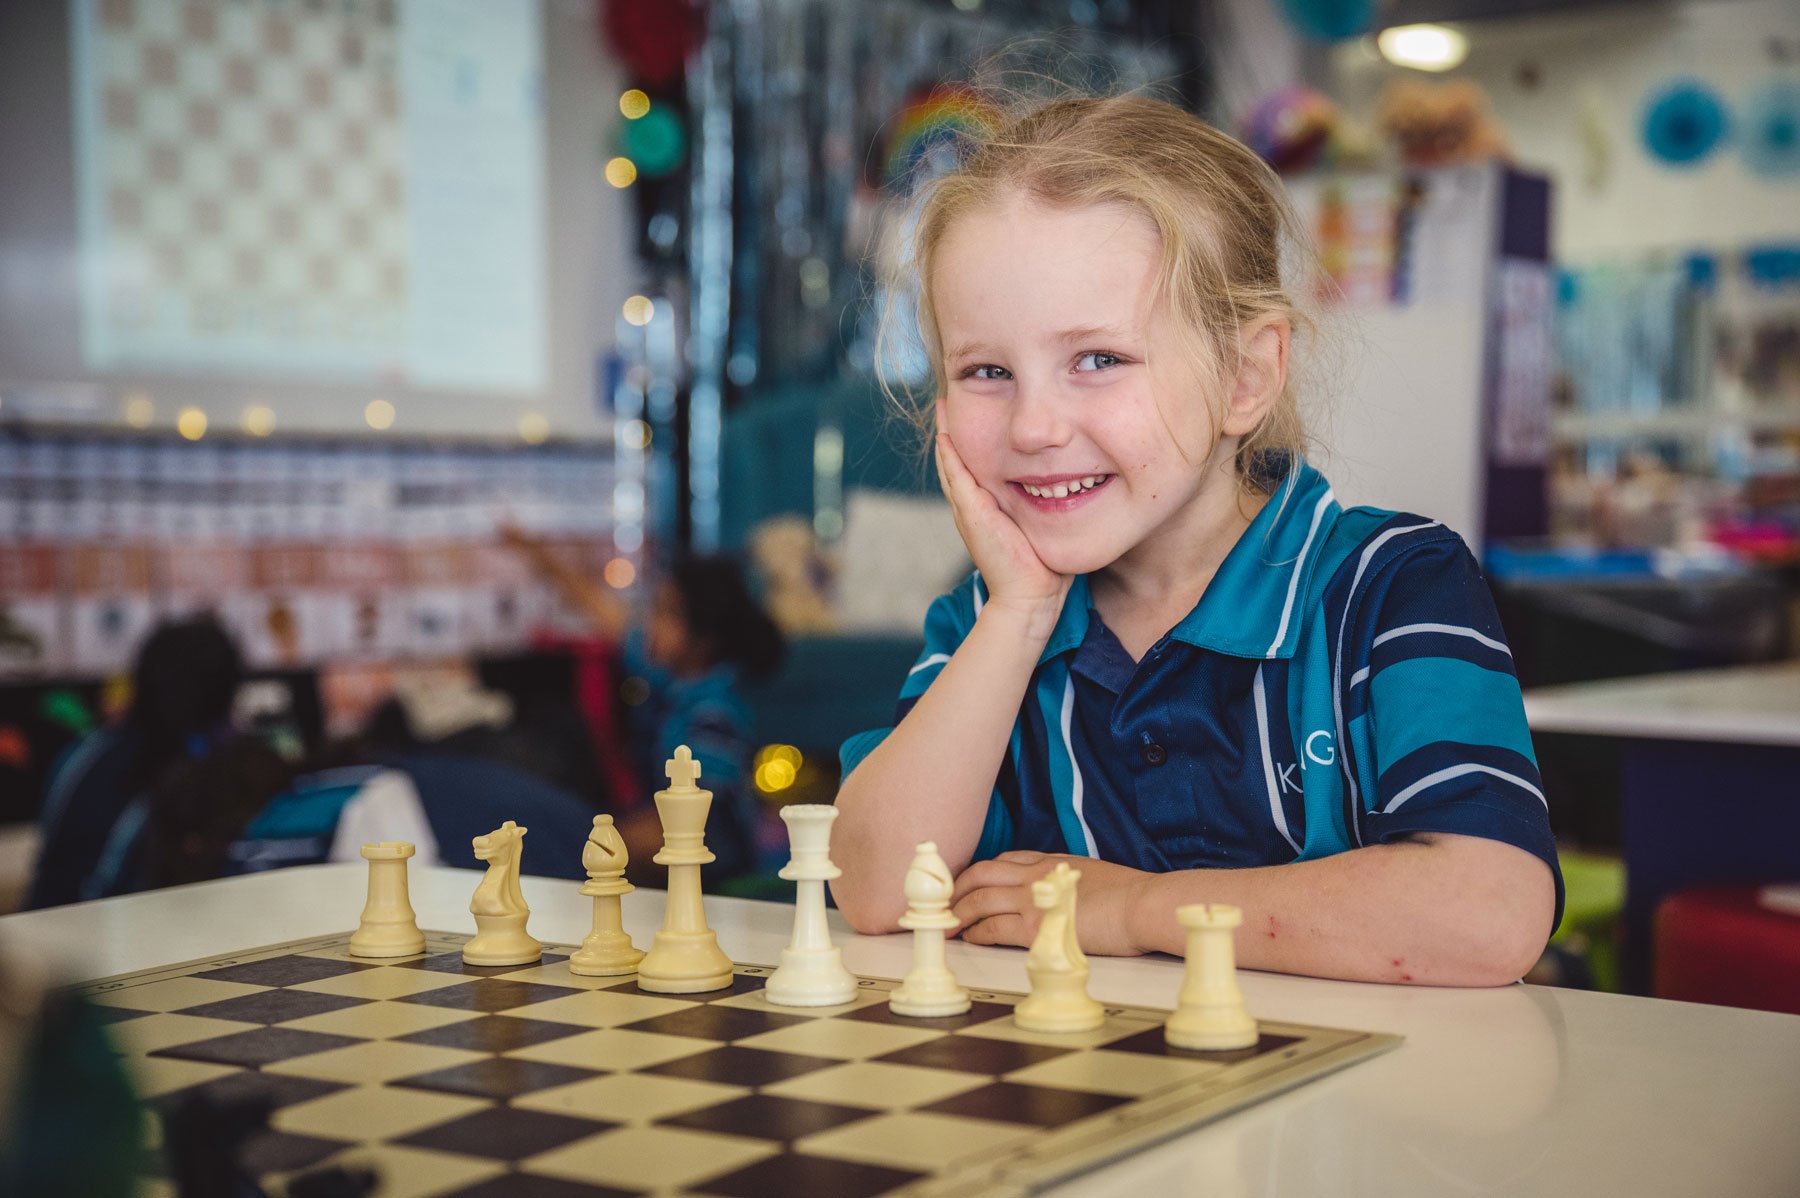 There are significant benefits from playing chess